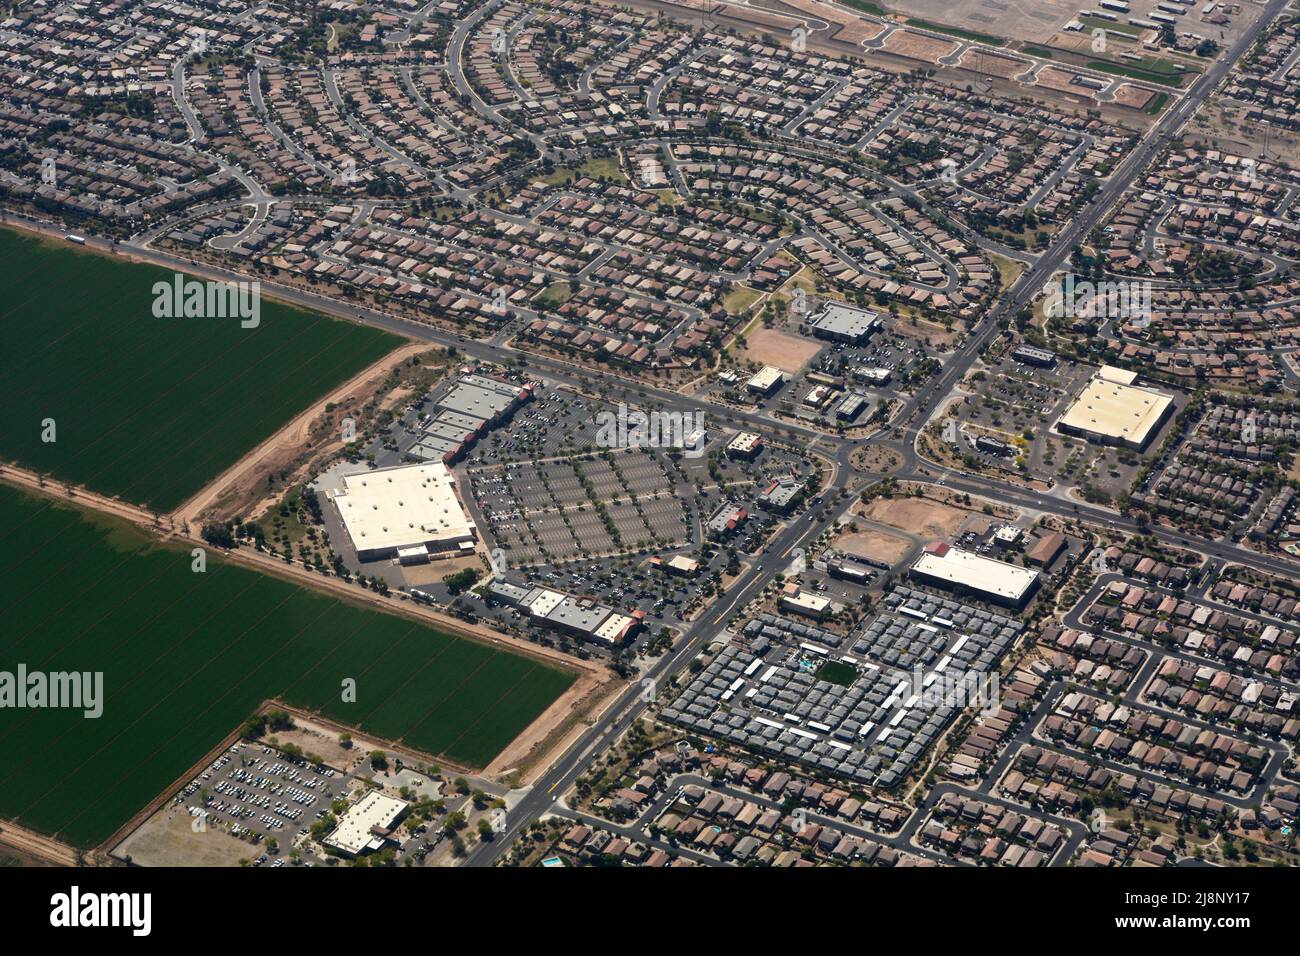 Aerial view of Tolleson, Arizona, and Pecan Promenade Shoppng Mall surrounded by housing and agricultural fields. Stock Photo